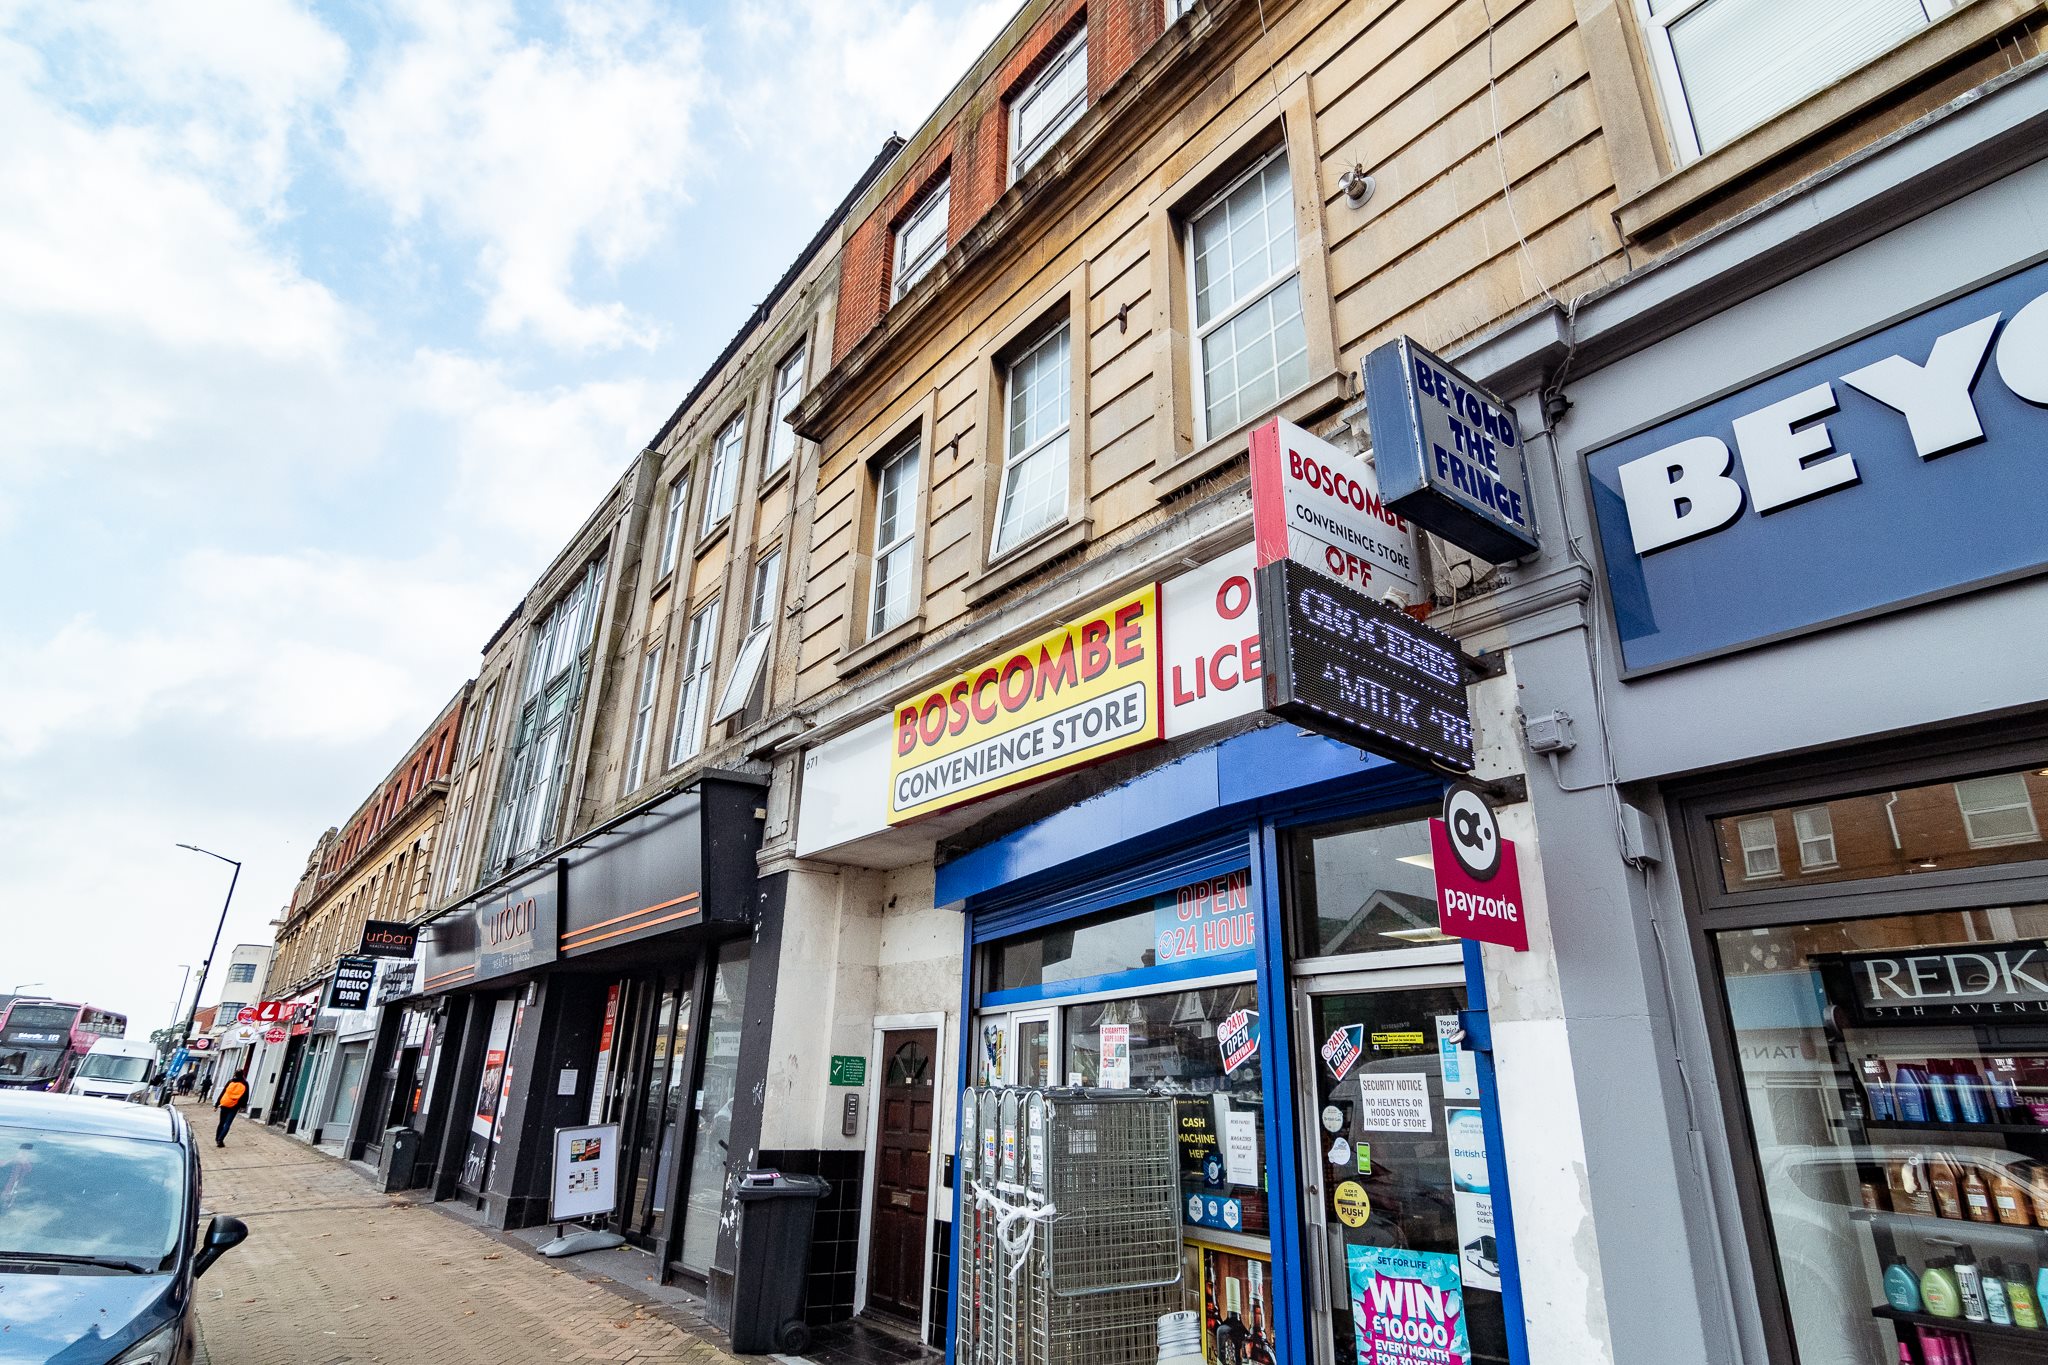 ** For sale by online auction ** pre-auction offers considered ** mortgage buyers welcome ** A good 2 bedroom flat located in the heart of Boscombe